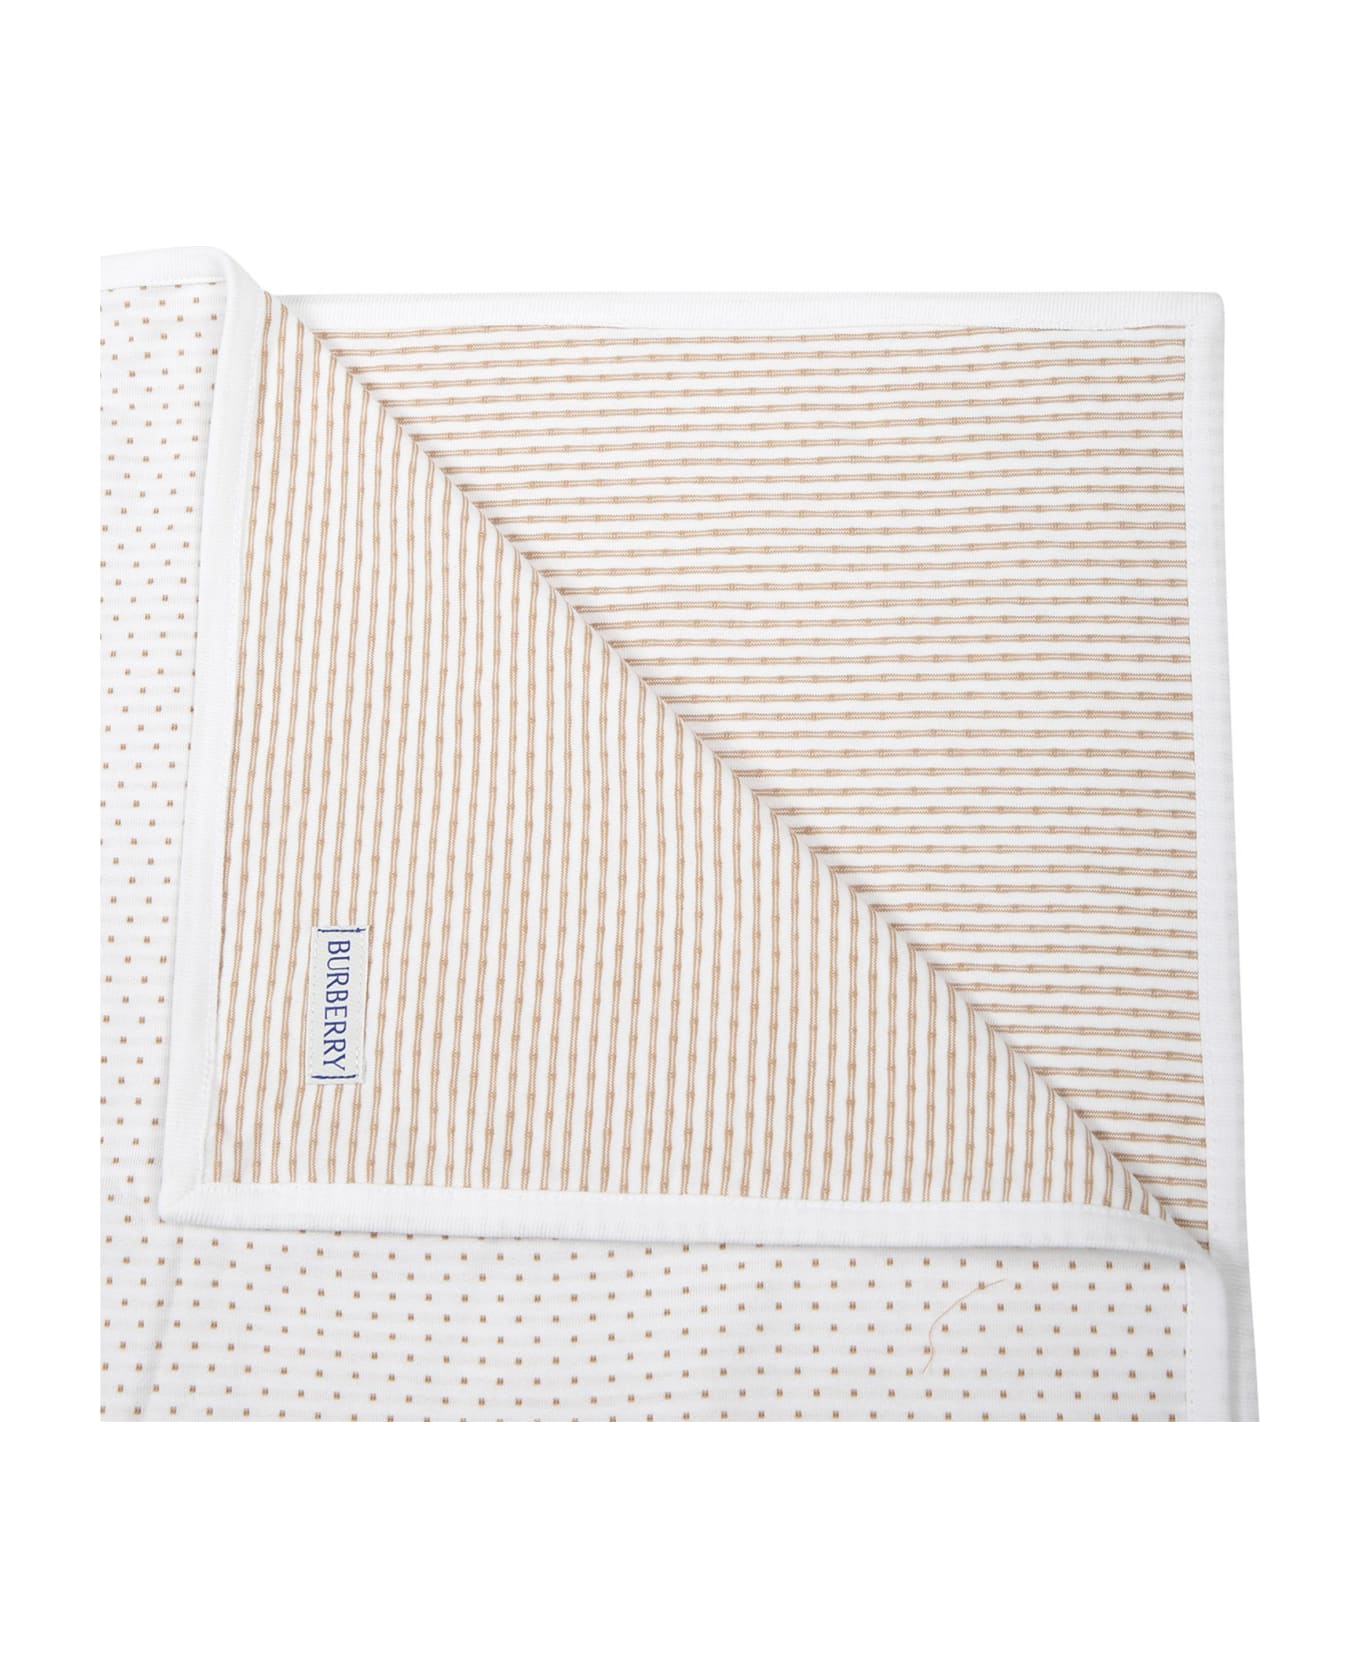 Burberry White Babies Blanket With All-over Logo And Pattern - White アクセサリー＆ギフト